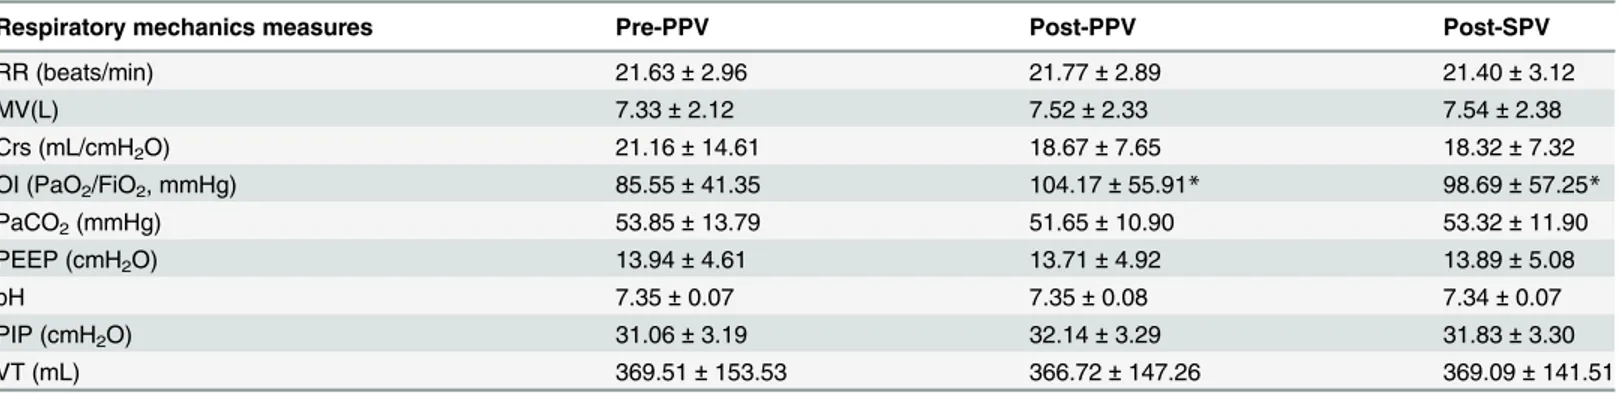 Table 2. Changes in parameters of respiratory mechanics during the PPV sessions (from 2 hours pre-PPV to 2 hours post-SPV) (Mean ± SD).